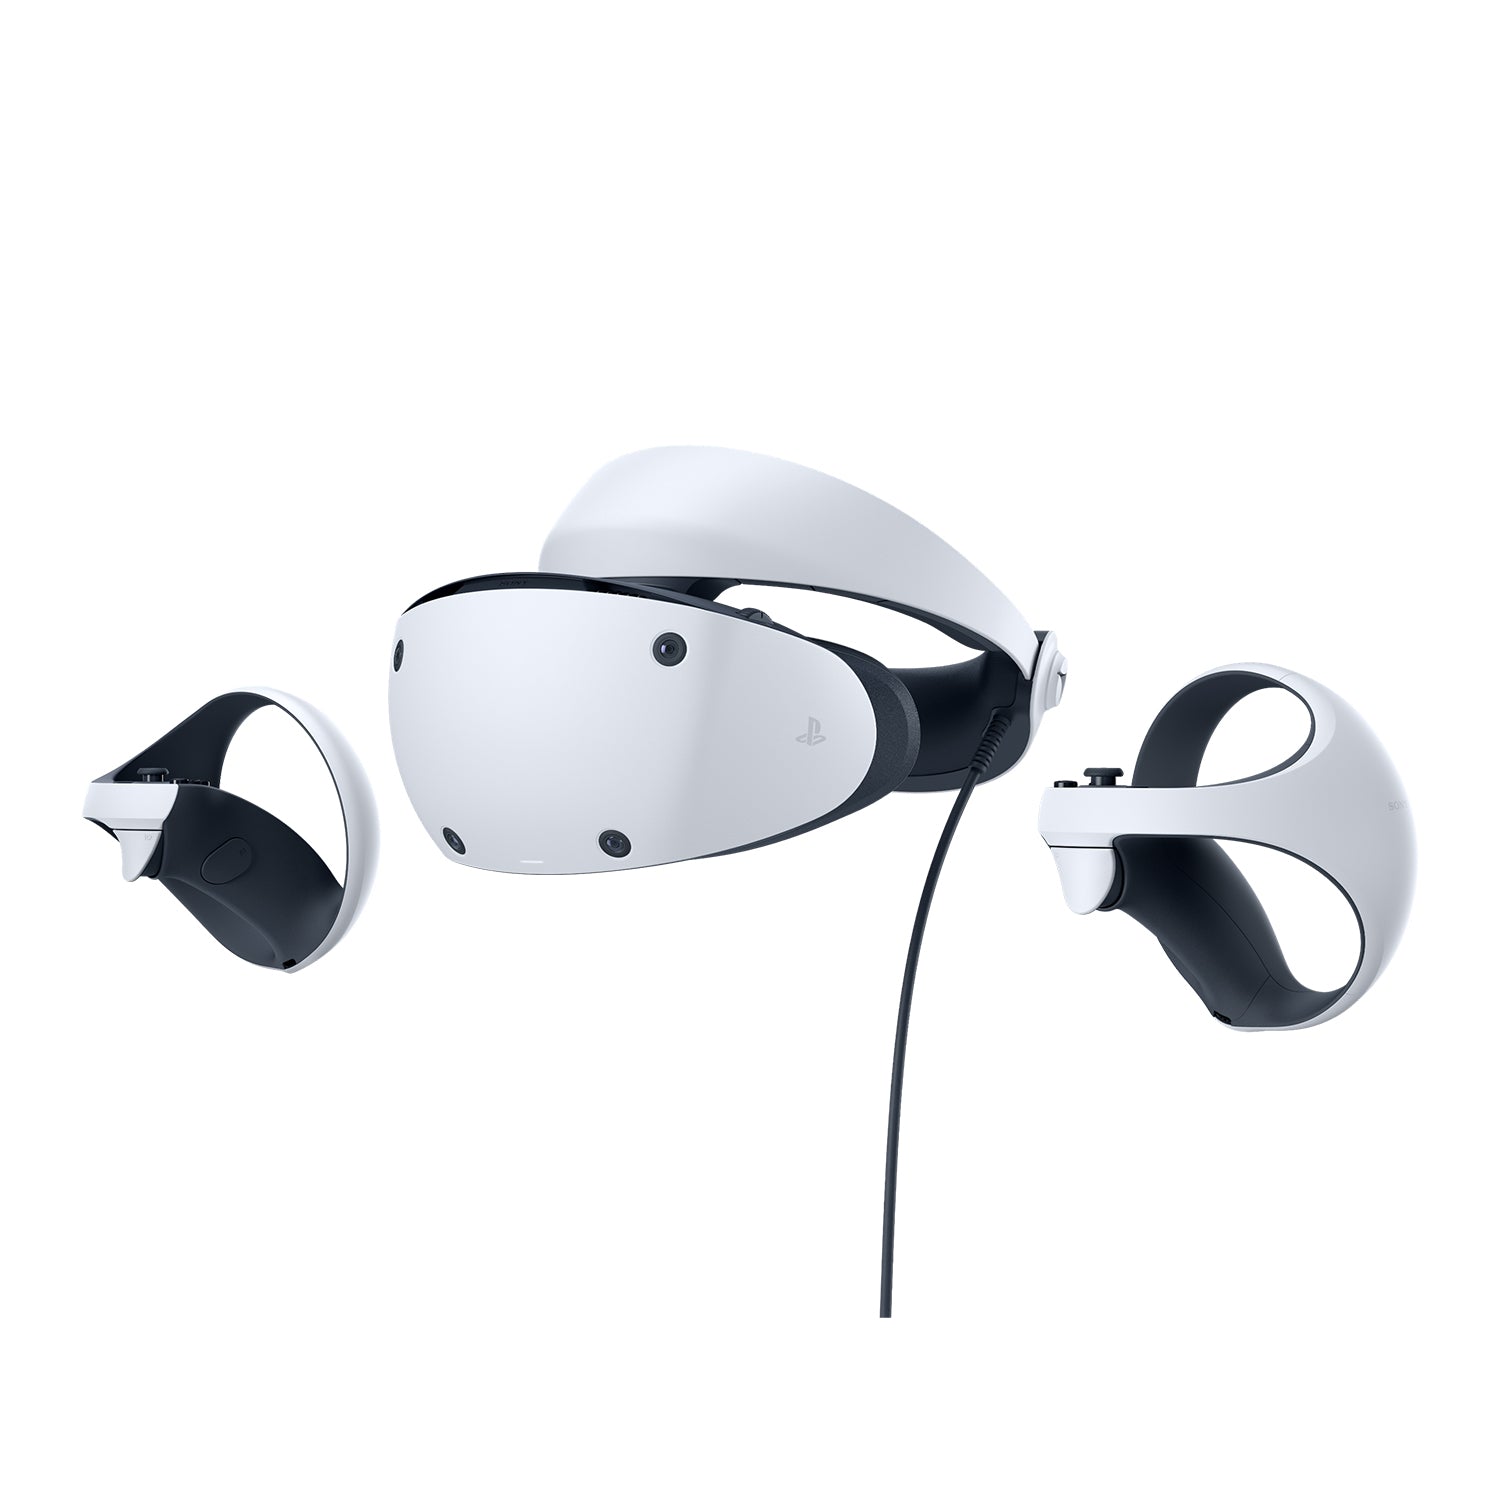 Sony PlayStation VR2 Virtual Reality Headset with VR2 Sense Controllers